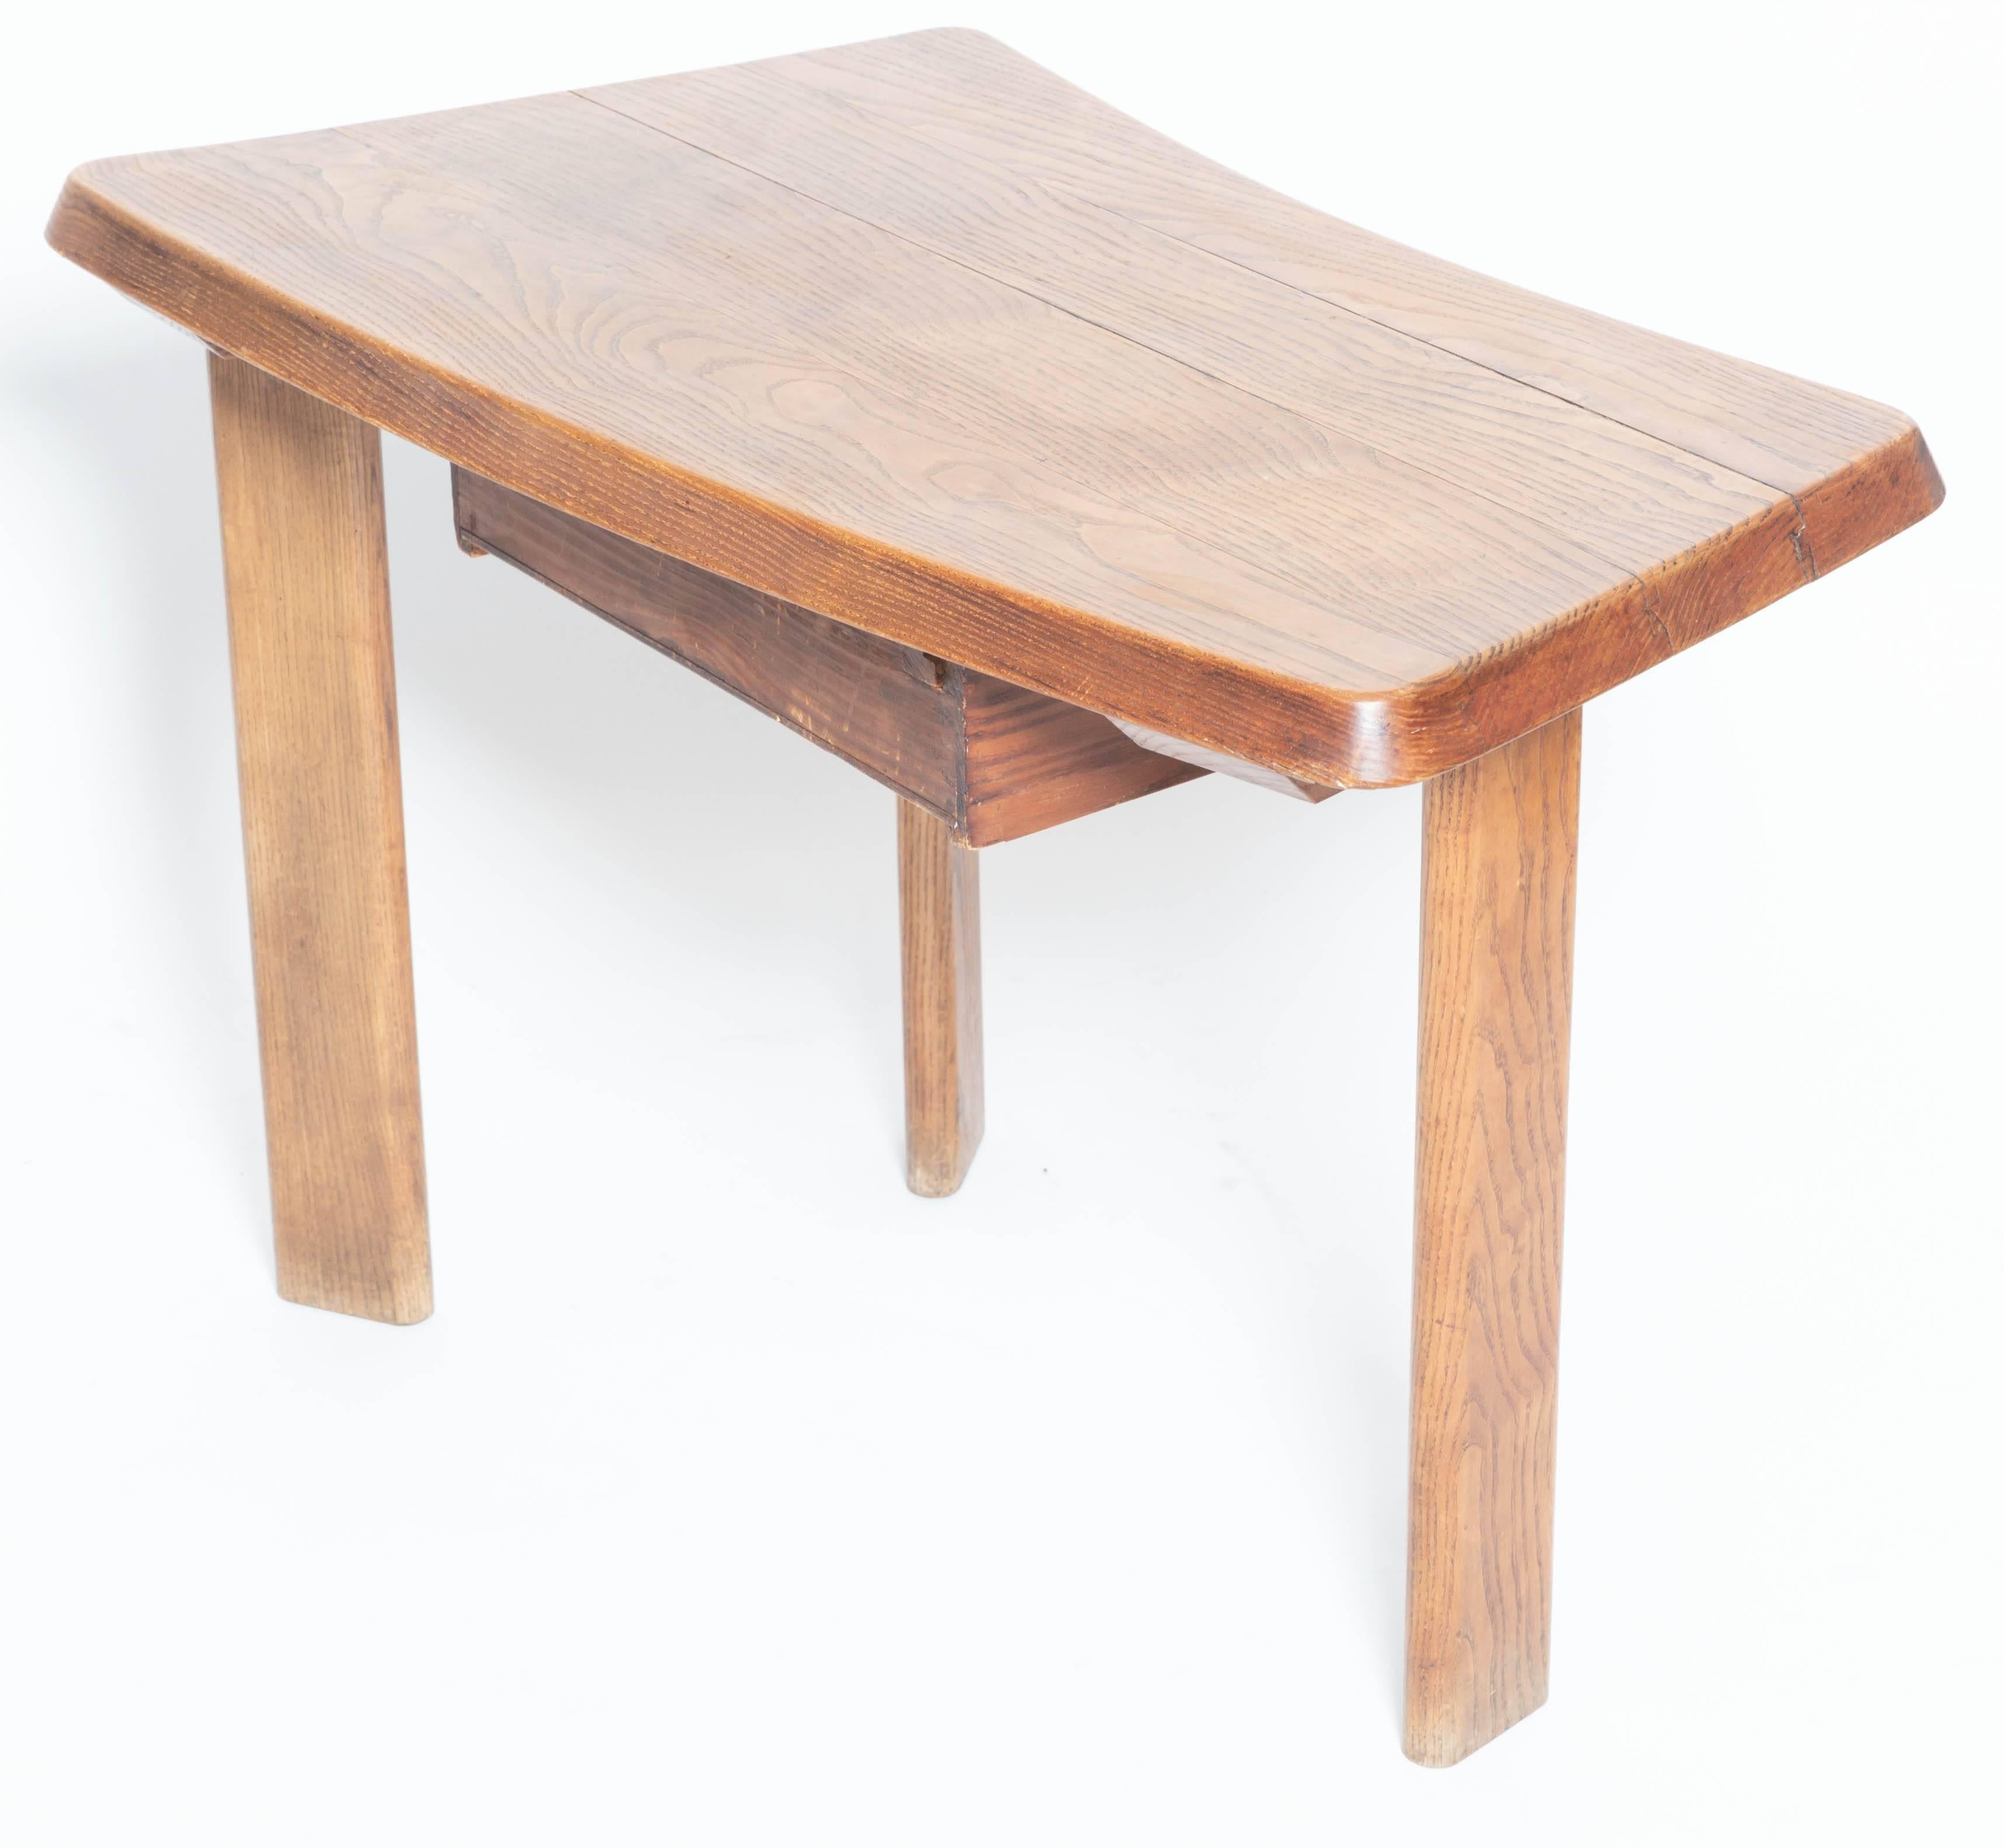 Three-Legged Wooden Oak Table with Drawer, in the Manner of Charlotte Perriand 1